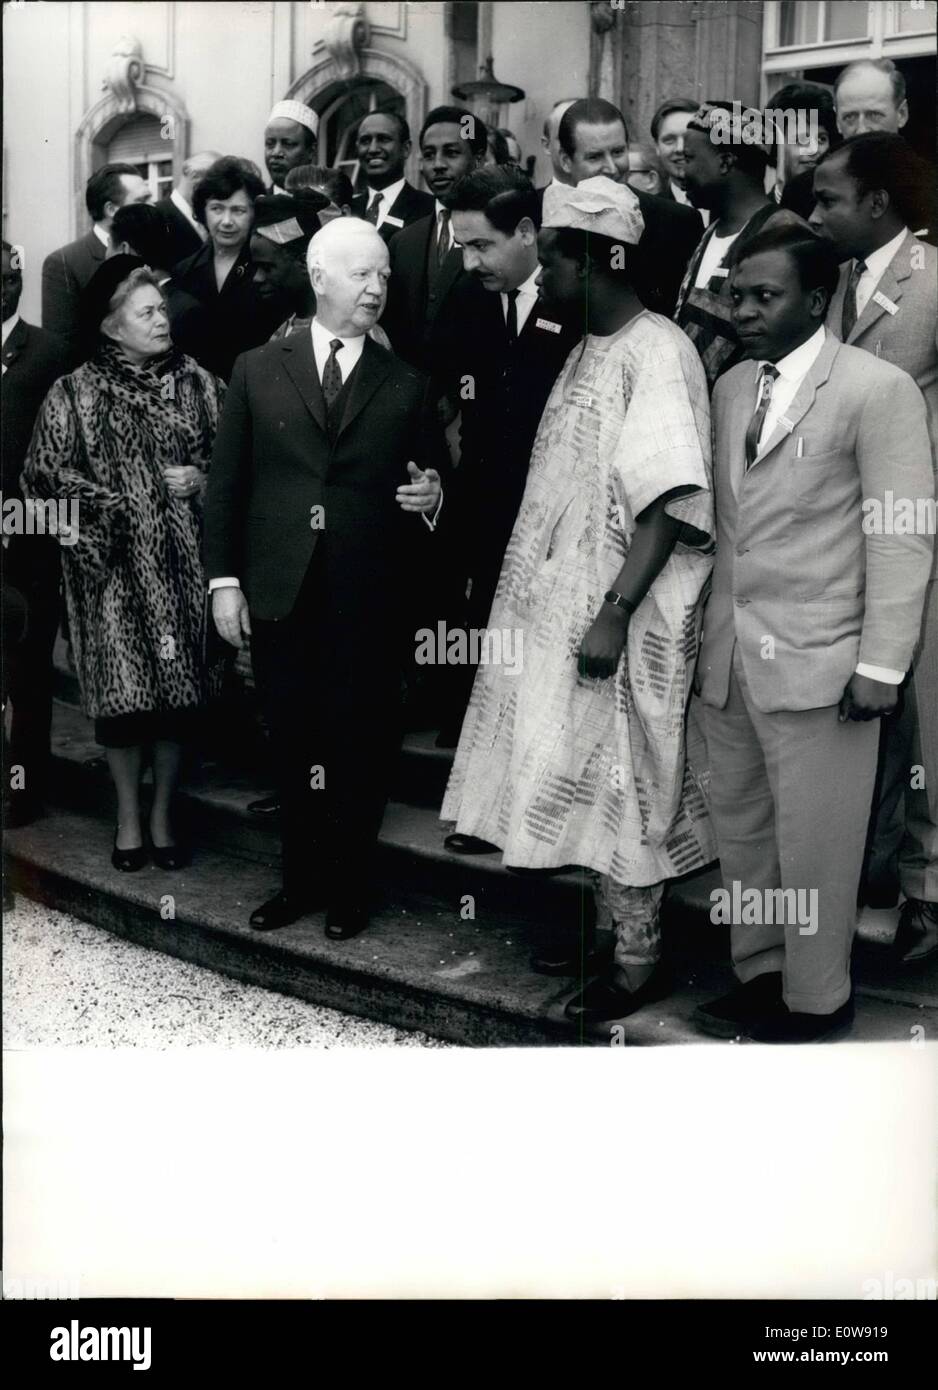 Feb. 02, 1962 - The Bundes President Visited the Doutsche Stiftung Fur Entwicklung lander in West-Berlin: Today the Bundesprasident Dr. Heinrich Lubke has visited the Deutsche Stiftung fur Entwicklungs lander (German foundation for developing countries) in Berlin-Tegel. Phot Shows F.L.T.R. Mrs. Wilhelmine Lubke, Bundesprasident Dr. Heinrich Lubke, Omar Ismail Khatib director of Peogramme Production from Jordan, Joseph Ade Adentan information officer from Nigeria and Paul Andreas Sozigwa National Programme Original from Tanganyika. Stock Photo